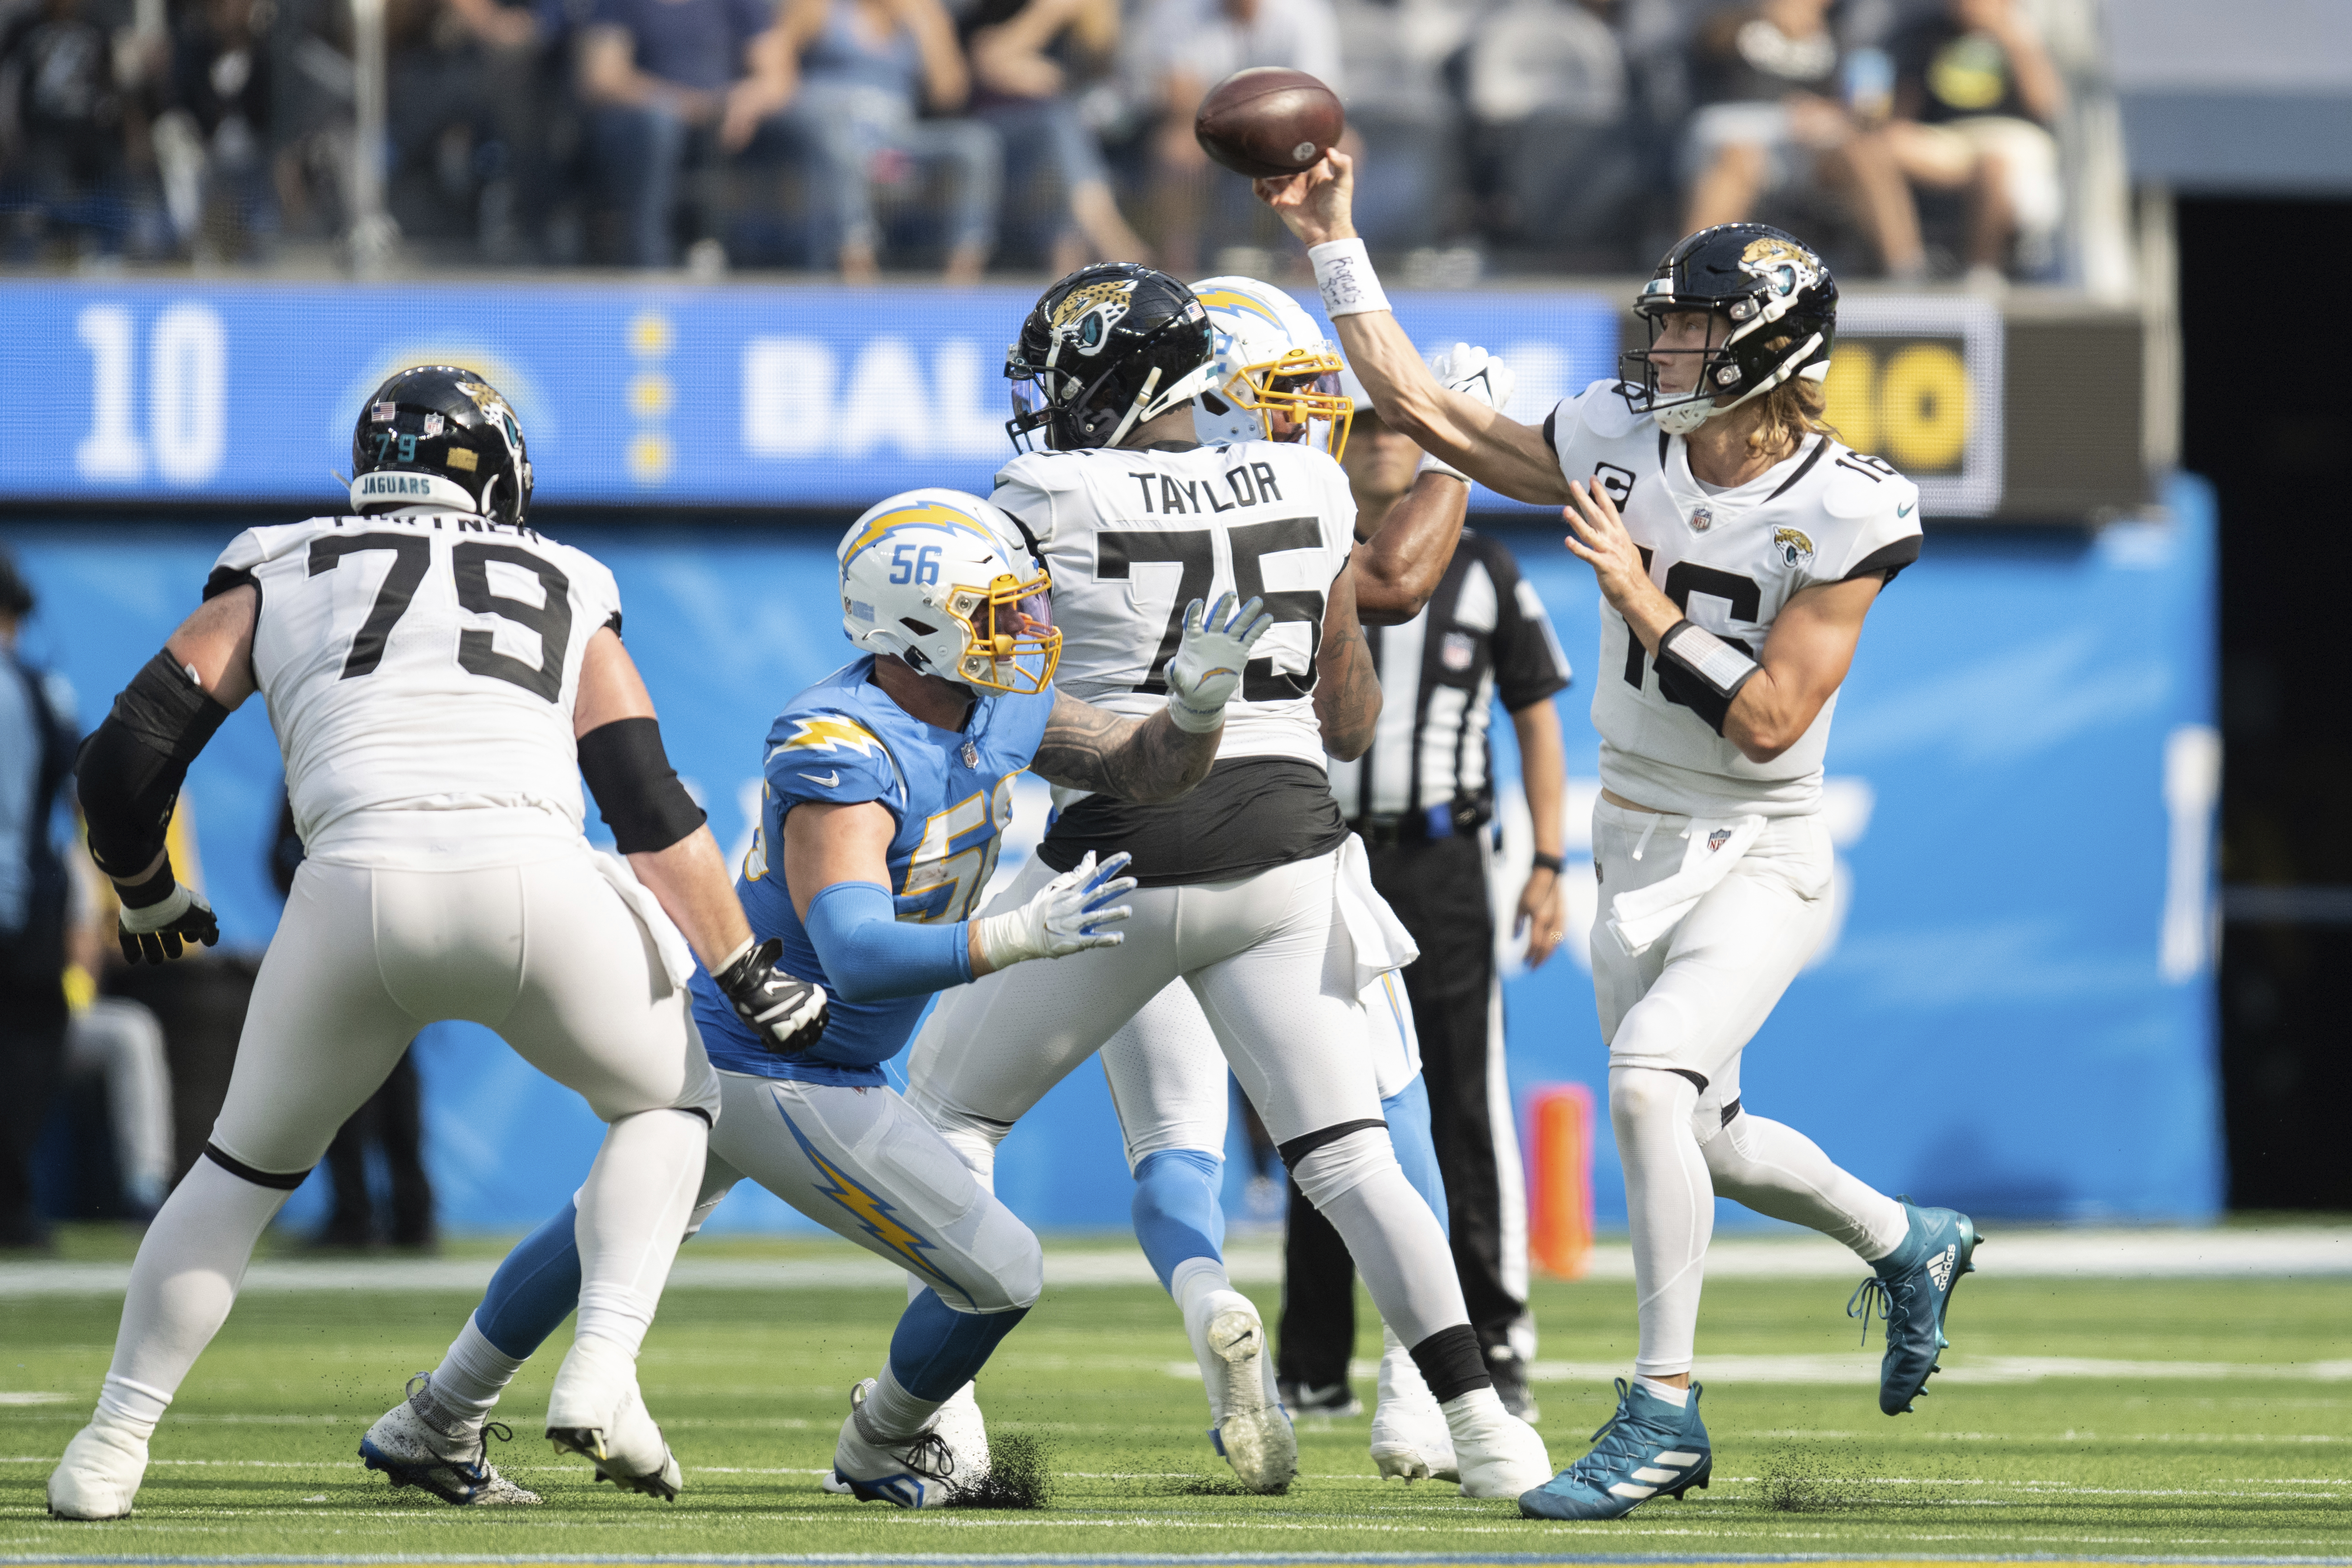 Jaguars win first playoff game in 10 years, advance to divisional round  against Steelers